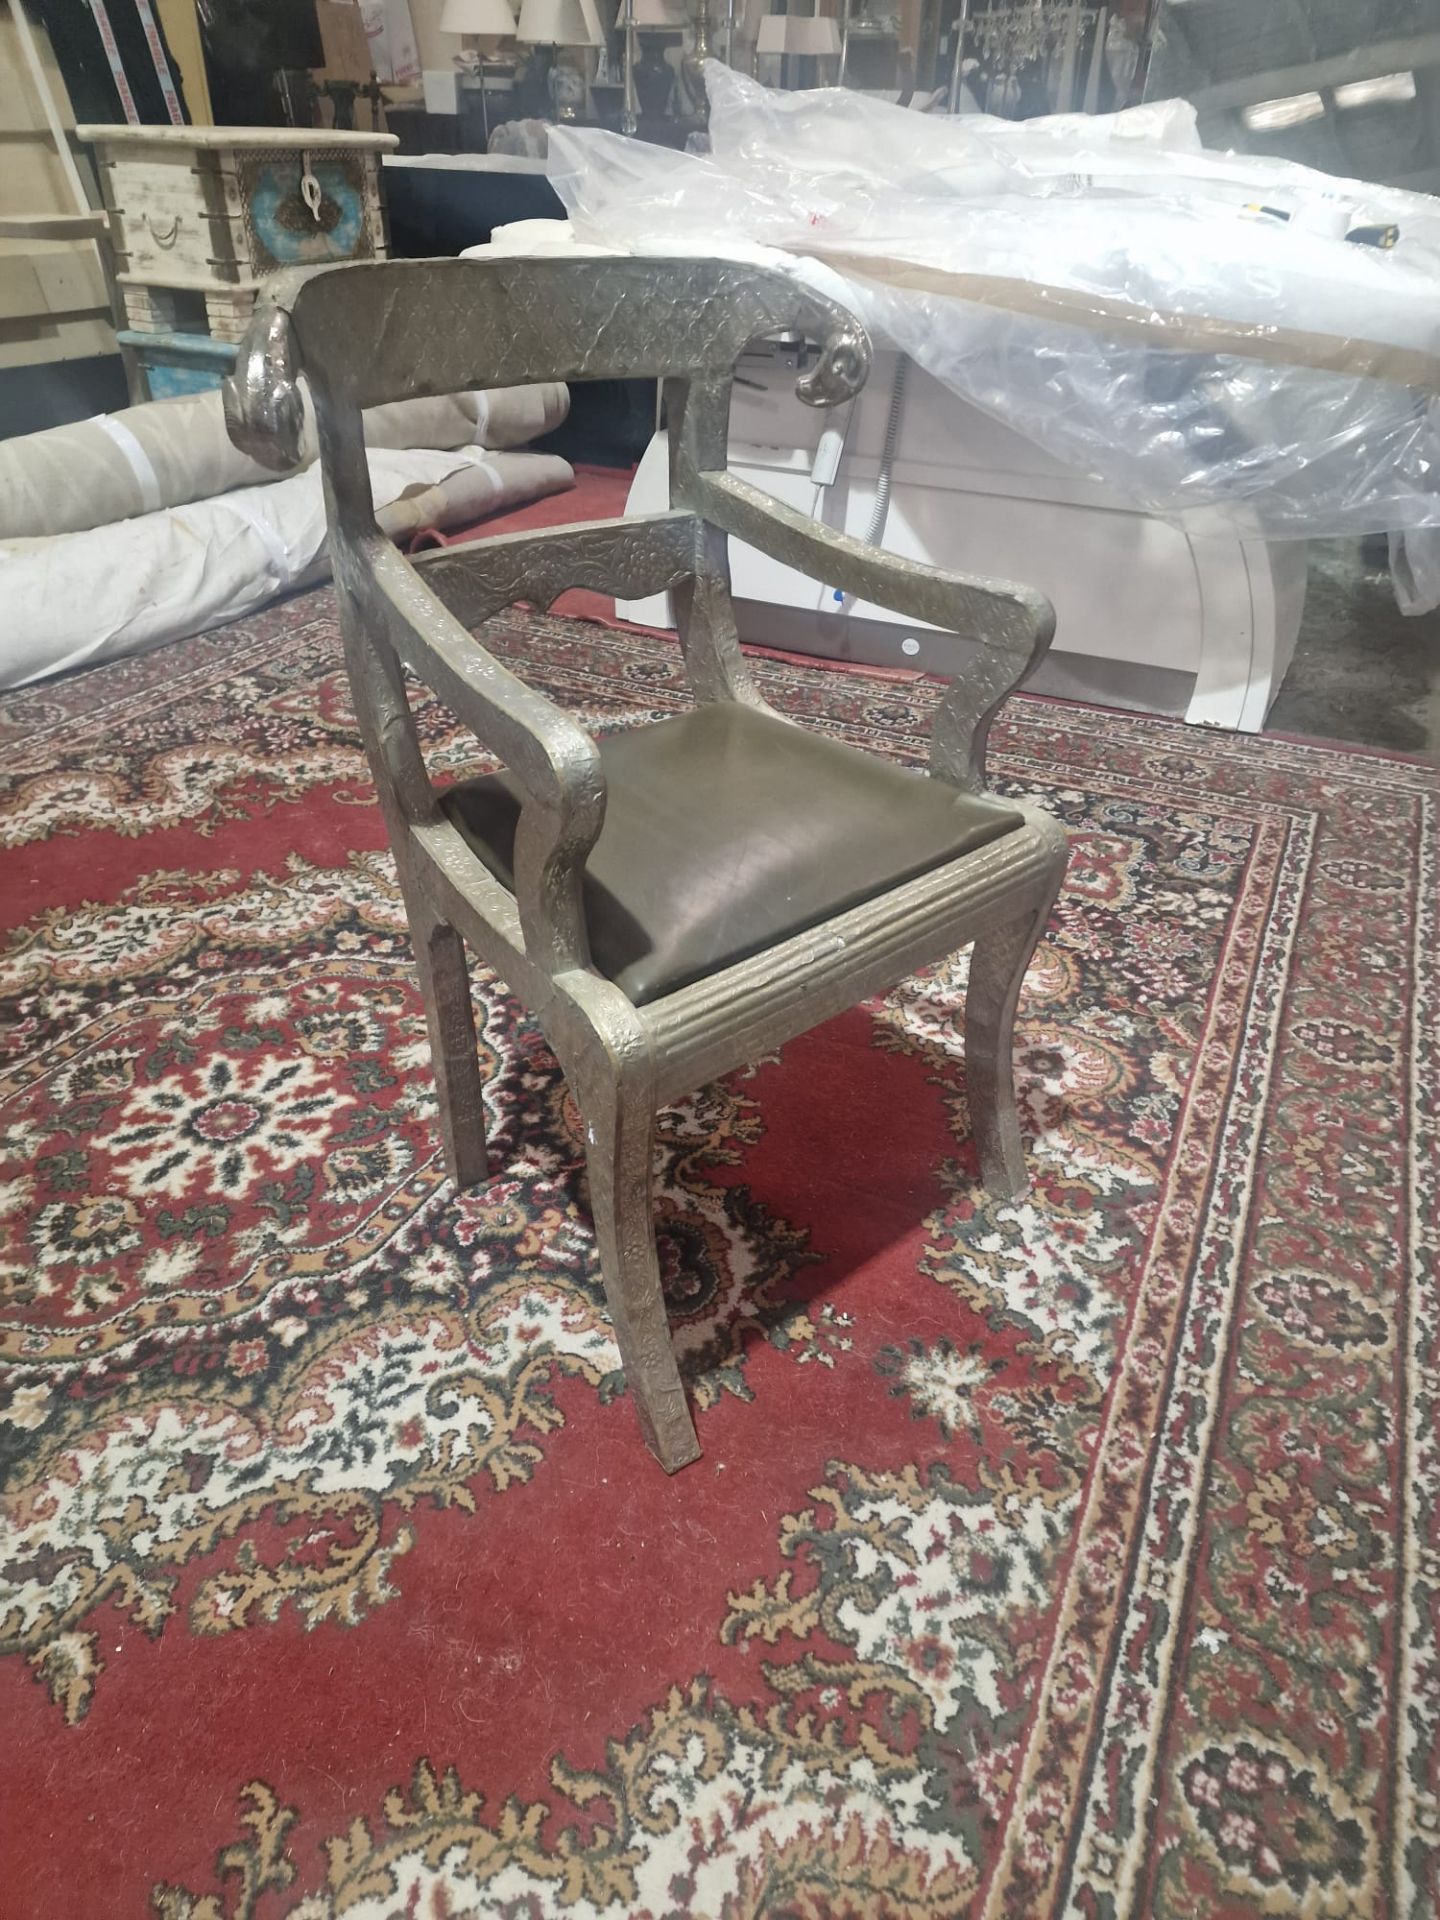 Dowry Chair And Footstool A Striking Vintage Anglo-Indian Silvered Metal-Clad Chair, 20th Century, - Image 15 of 16